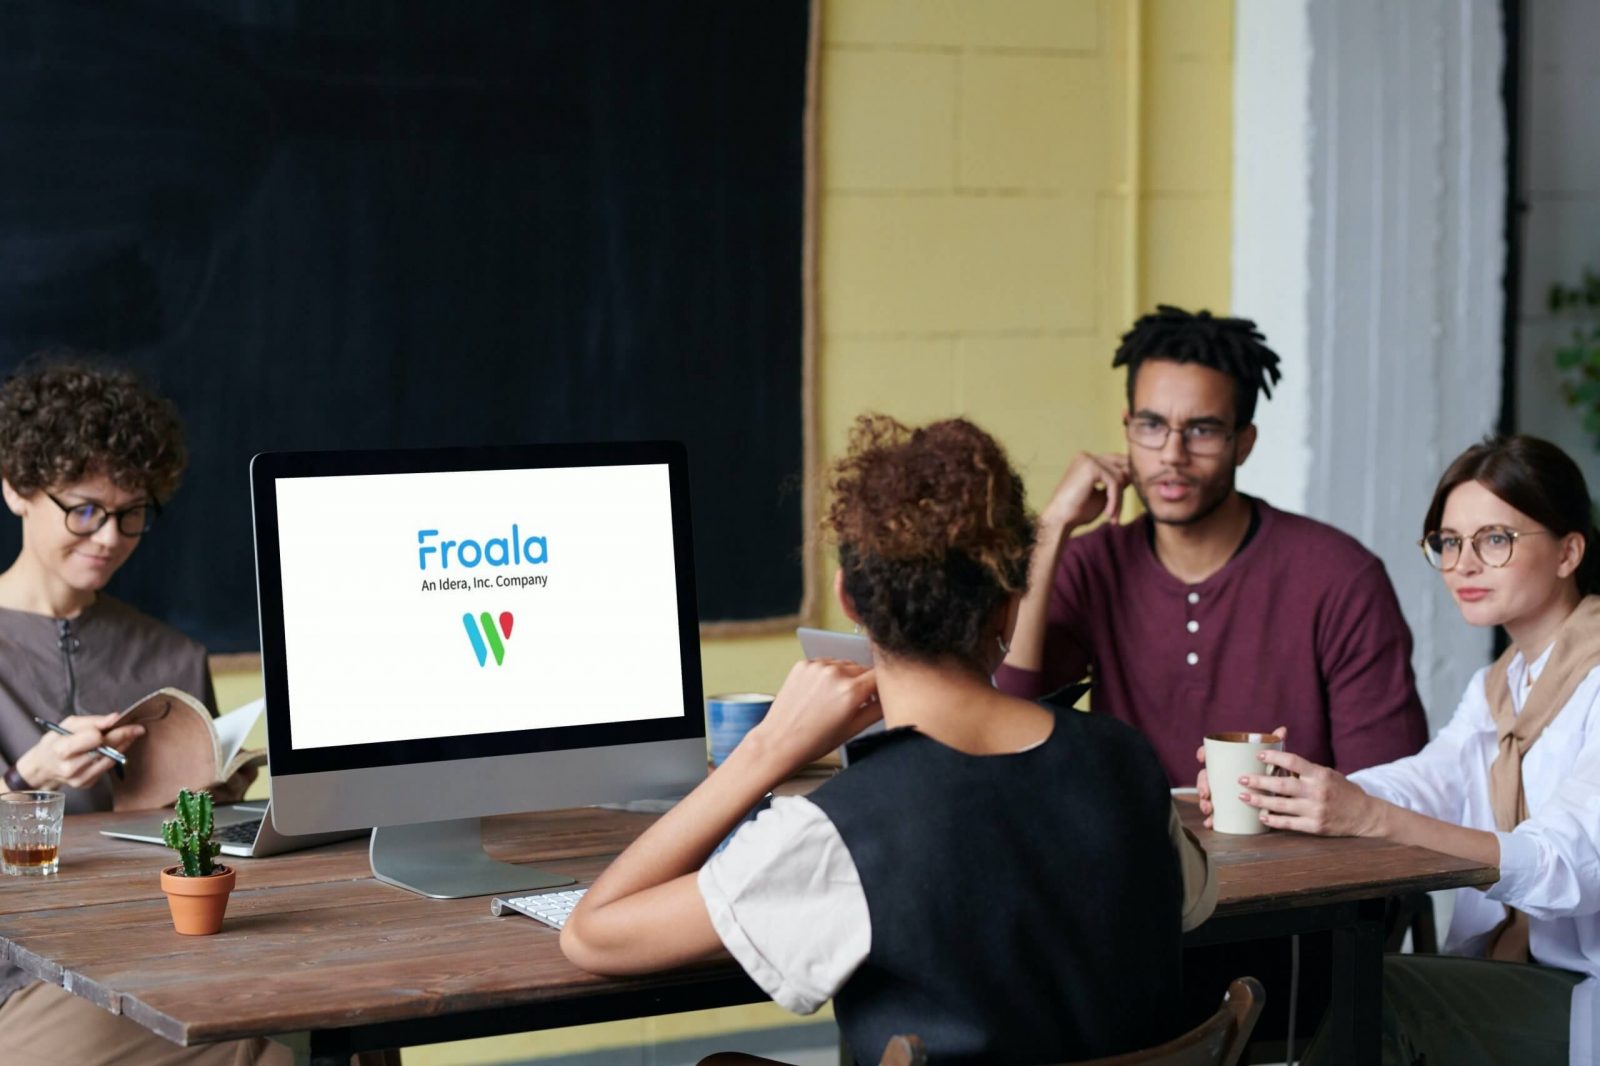 A group of professionals discussing around a computer with Froala's logo on the screen.